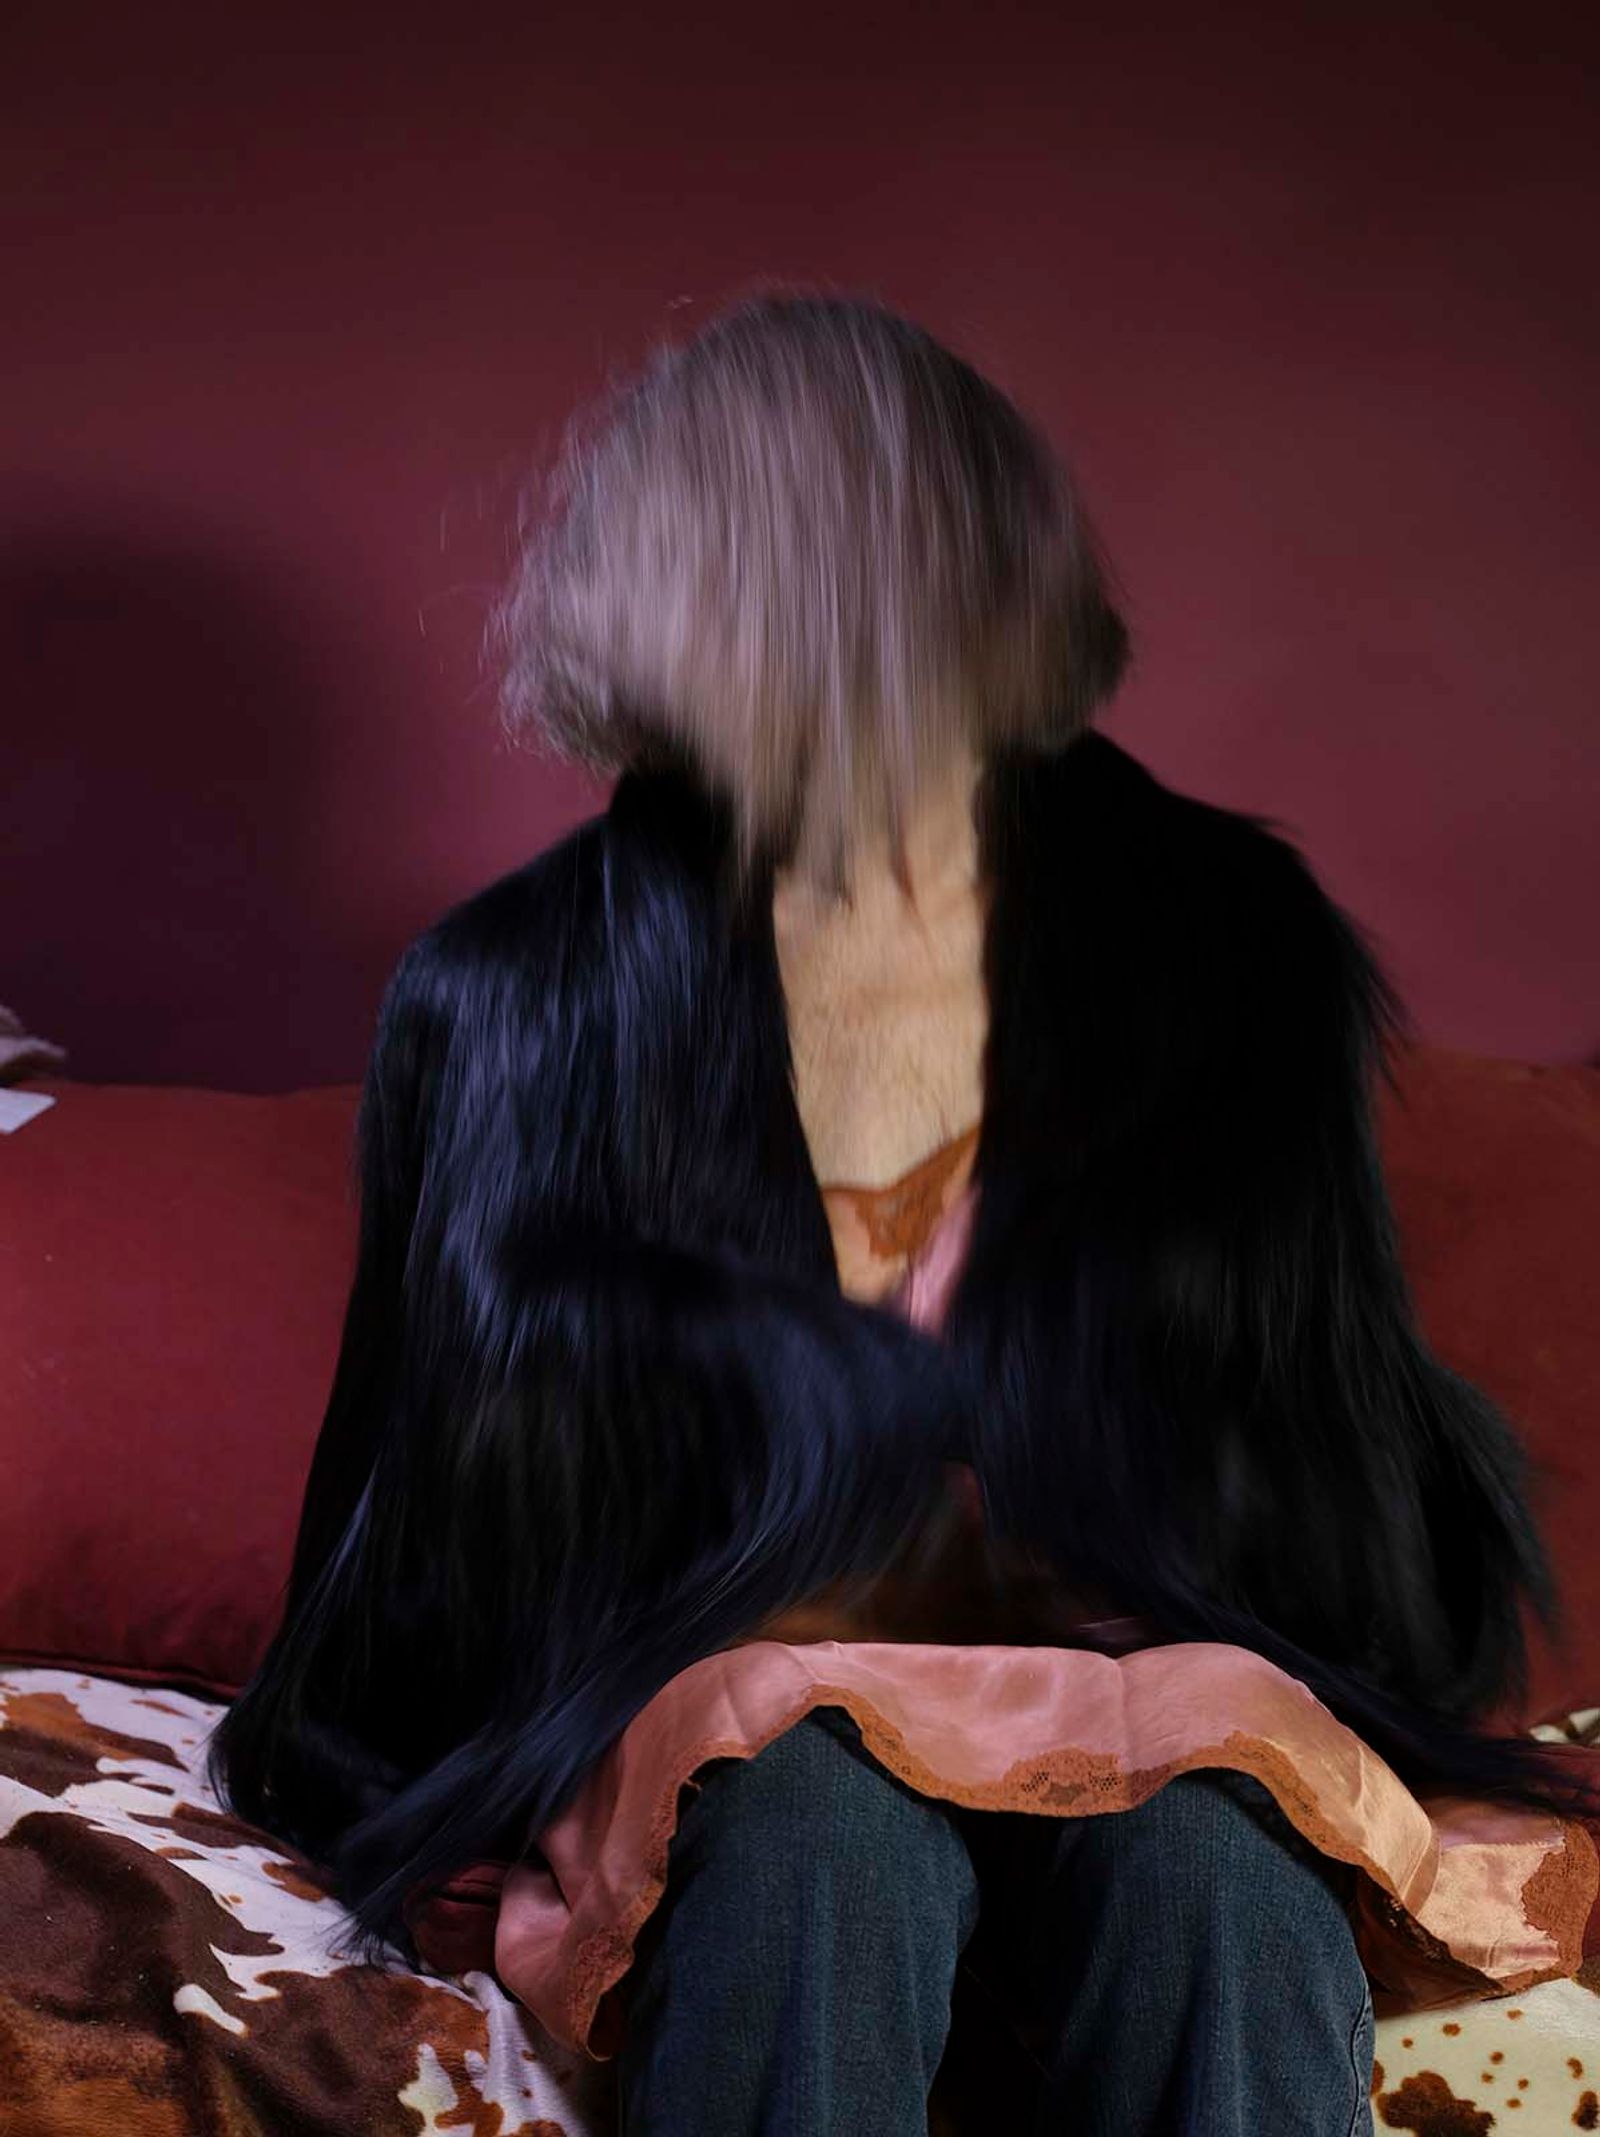 © Yvonne Steiger - Image from the Women Fur and Wood photography project